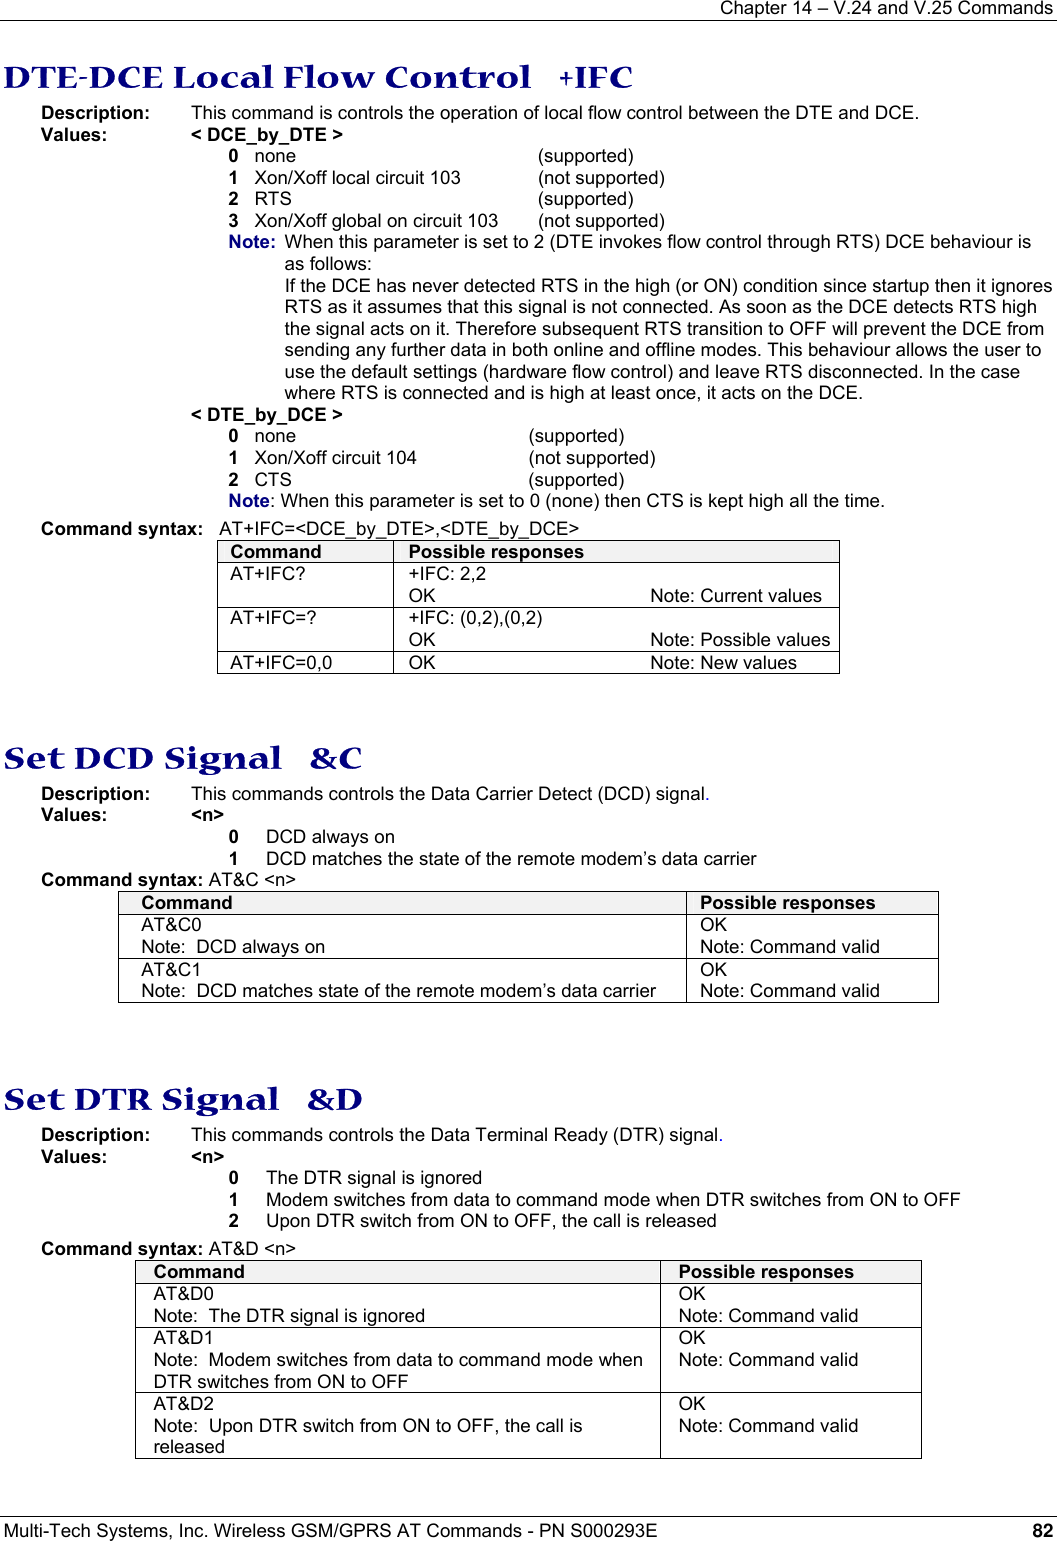 Chapter 14 – V.24 and V.25 Commands  Multi-Tech Systems, Inc. Wireless GSM/GPRS AT Commands - PN S000293E 82  DTE-DCE Local Flow Control   +IFC Description:   This command is controls the operation of local flow control between the DTE and DCE. Values:  &lt; DCE_by_DTE &gt;   0   none  (supported) 1   Xon/Xoff local circuit 103  (not supported) 2   RTS  (supported) 3   Xon/Xoff global on circuit 103  (not supported) Note:  When this parameter is set to 2 (DTE invokes flow control through RTS) DCE behaviour is as follows:   If the DCE has never detected RTS in the high (or ON) condition since startup then it ignores RTS as it assumes that this signal is not connected. As soon as the DCE detects RTS high the signal acts on it. Therefore subsequent RTS transition to OFF will prevent the DCE from sending any further data in both online and offline modes. This behaviour allows the user to use the default settings (hardware flow control) and leave RTS disconnected. In the case where RTS is connected and is high at least once, it acts on the DCE. &lt; DTE_by_DCE &gt;   0   none   (supported) 1   Xon/Xoff circuit 104   (not supported) 2   CTS   (supported) Note: When this parameter is set to 0 (none) then CTS is kept high all the time. Command syntax:   AT+IFC=&lt;DCE_by_DTE&gt;,&lt;DTE_by_DCE&gt; Command  Possible responses AT+IFC?    +IFC: 2,2 OK  Note: Current values AT+IFC=?   +IFC: (0,2),(0,2) OK  Note: Possible values  AT+IFC=0,0    OK  Note: New values   Set DCD Signal   &amp;C Description:   This commands controls the Data Carrier Detect (DCD) signal. Values: &lt;n&gt; 0  DCD always on 1  DCD matches the state of the remote modem’s data carrier  Command syntax: AT&amp;C &lt;n&gt; Command  Possible responses AT&amp;C0 Note:  DCD always on OK Note: Command valid AT&amp;C1  Note:  DCD matches state of the remote modem’s data carrier OK Note: Command valid    Set DTR Signal   &amp;D Description:   This commands controls the Data Terminal Ready (DTR) signal. Values:   &lt;n&gt; 0  The DTR signal is ignored 1  Modem switches from data to command mode when DTR switches from ON to OFF 2  Upon DTR switch from ON to OFF, the call is released Command syntax: AT&amp;D &lt;n&gt; Command  Possible responses AT&amp;D0 Note:  The DTR signal is ignored OK Note: Command valid AT&amp;D1  Note:  Modem switches from data to command mode when DTR switches from ON to OFF OK Note: Command valid  AT&amp;D2  Note:  Upon DTR switch from ON to OFF, the call is released OK Note: Command valid   